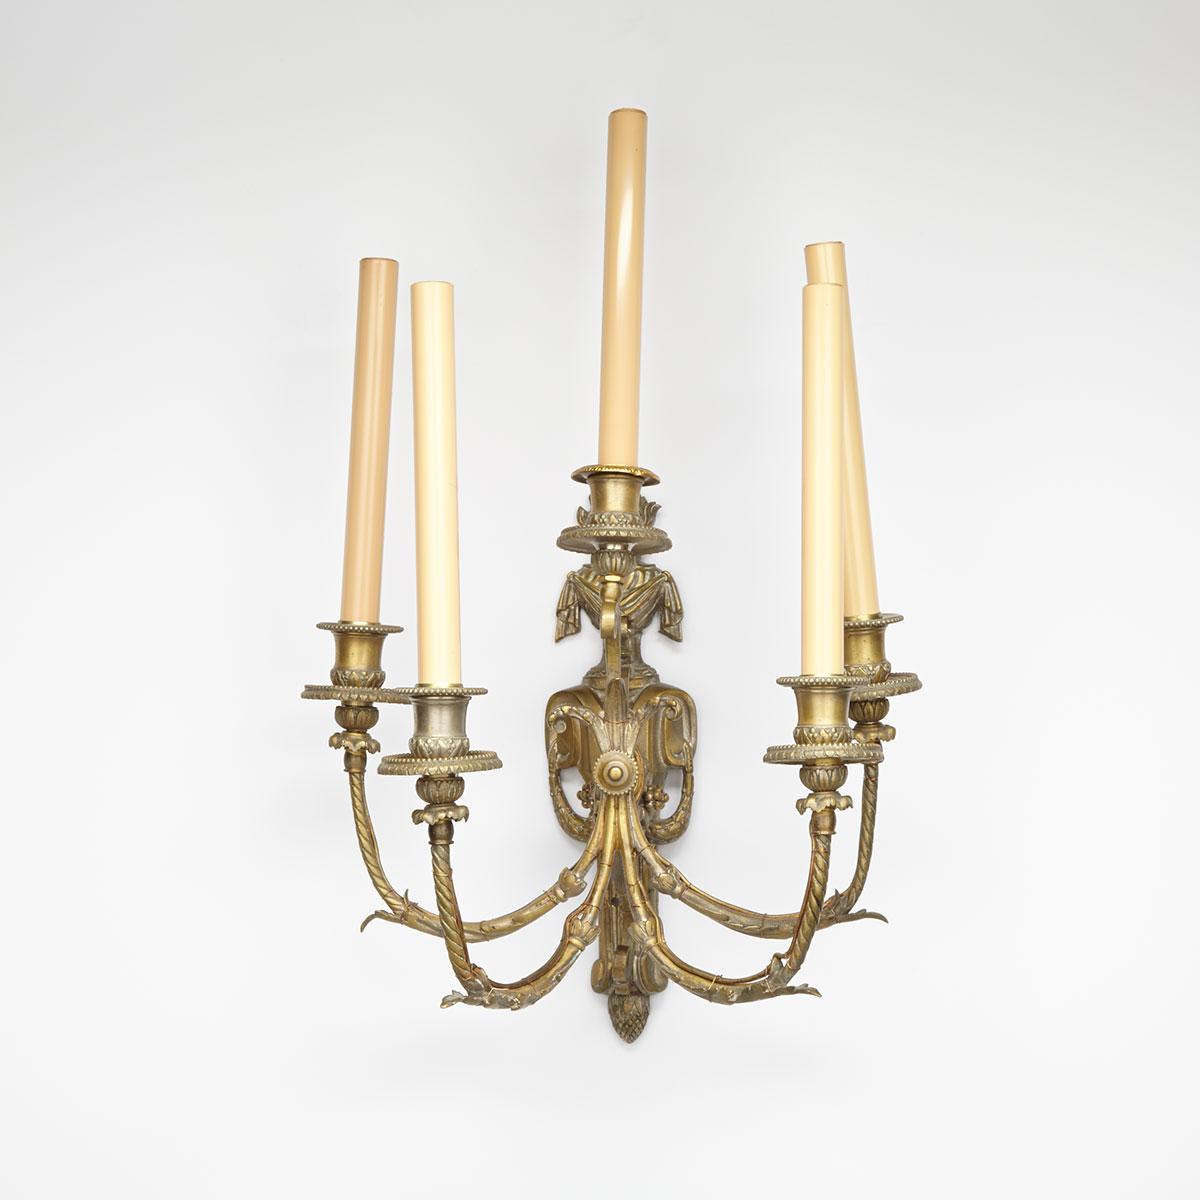 French Silvered Bronze Five Light Wall Sconce, 19th/early 20th century